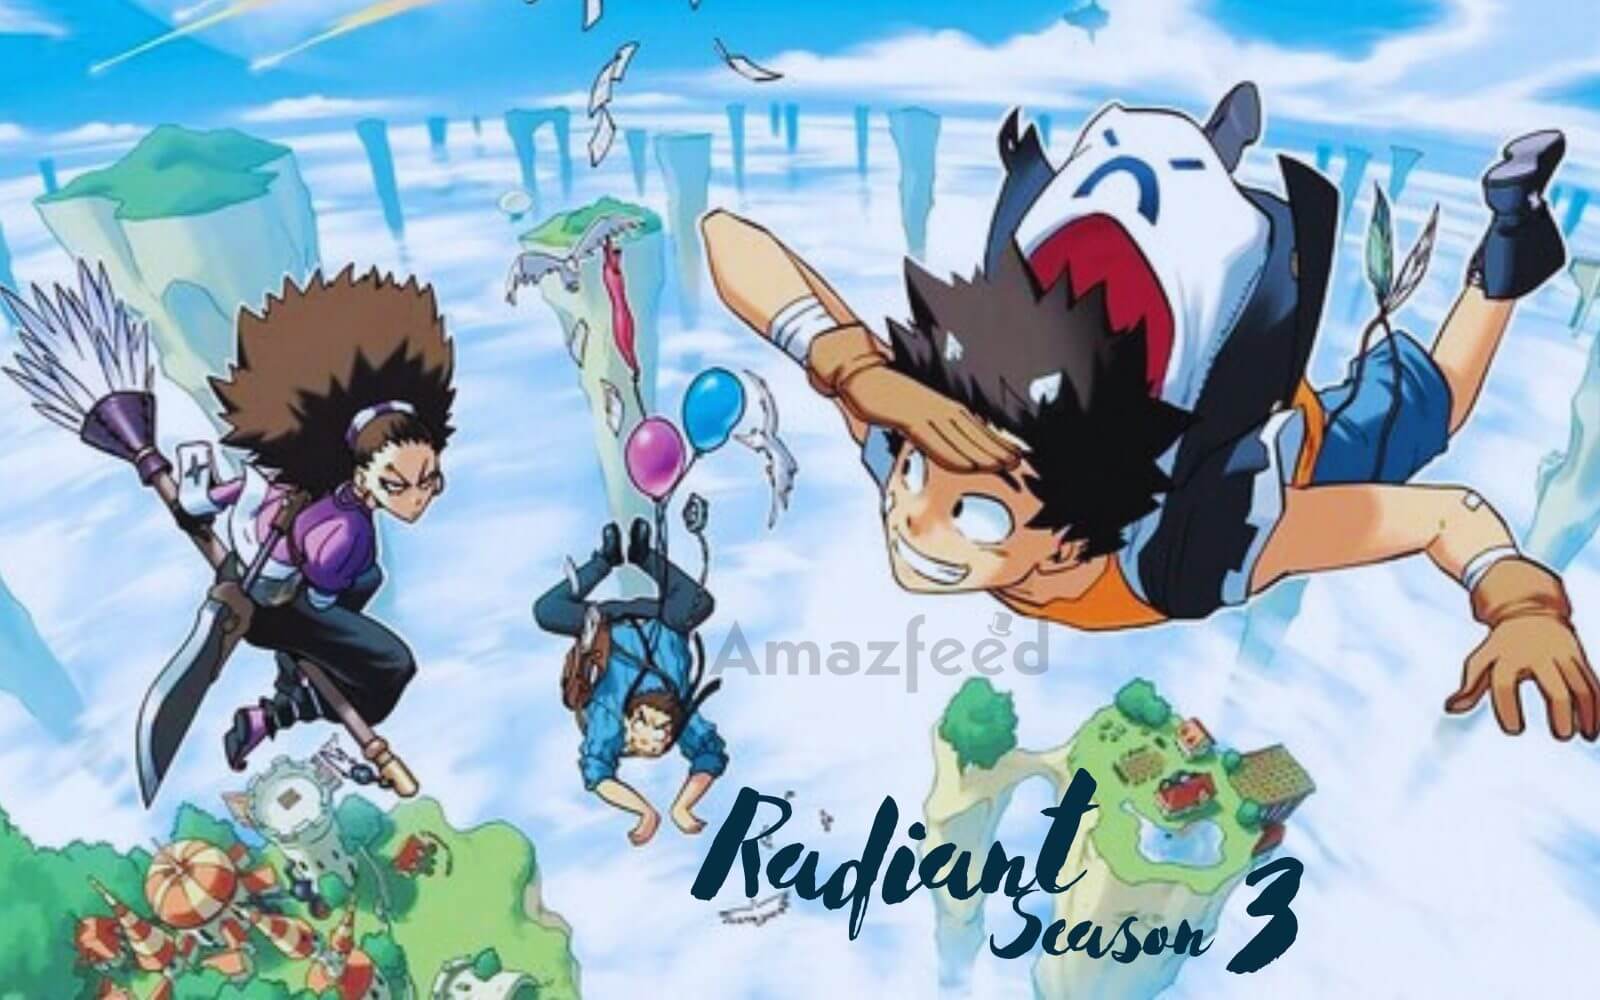 Is Radiant Season 3 Coming [Release Date] » Amazfeed